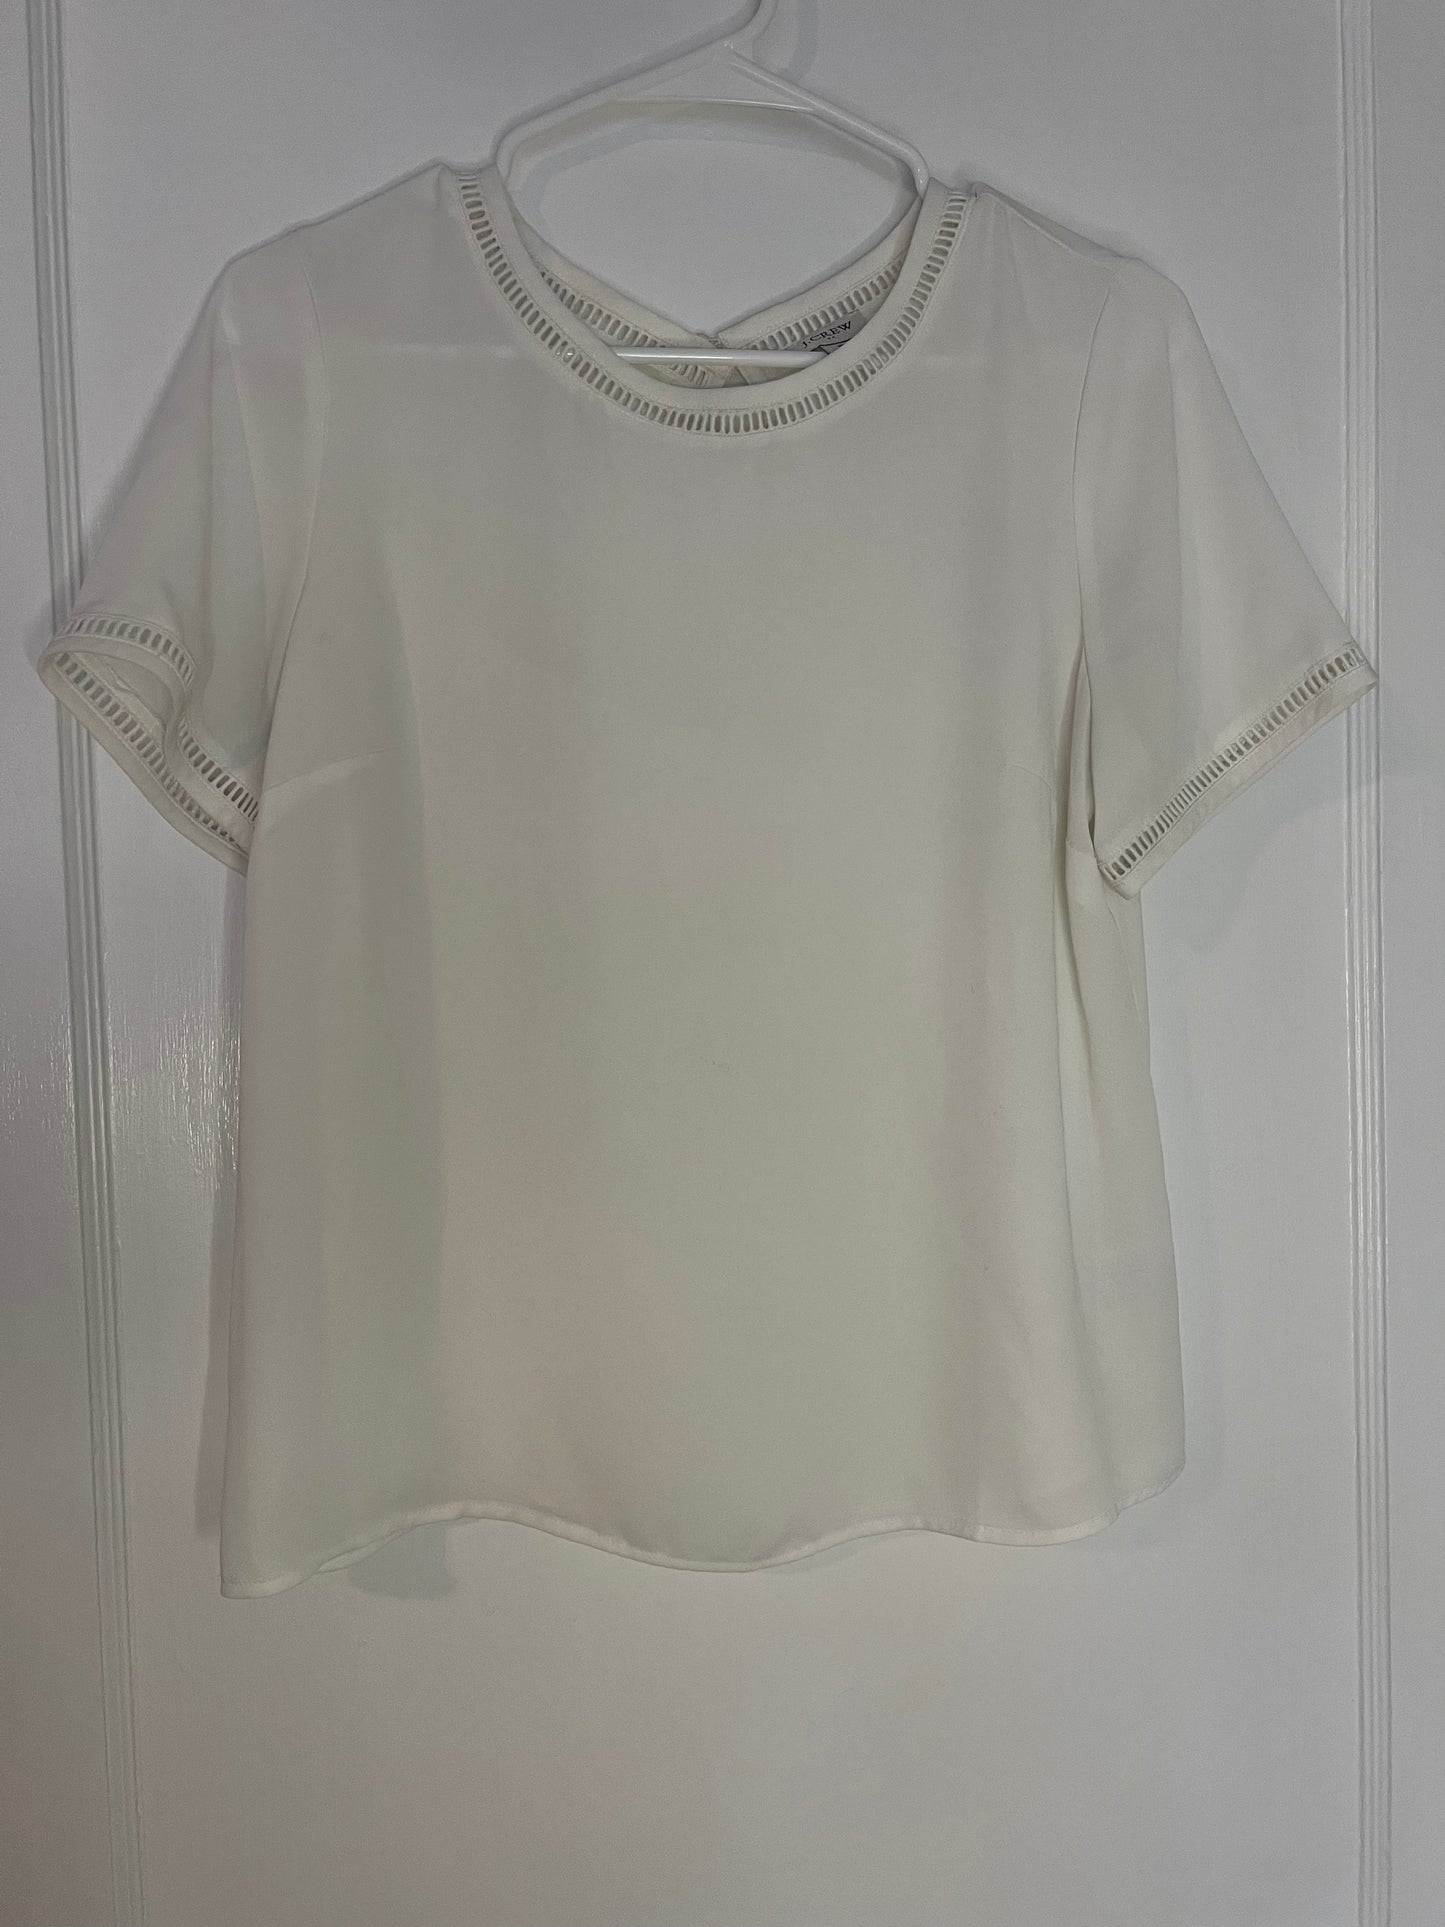 JCrew Sheer White Top Shirt Blouse Size Small EUC PPU 45208 or Spring Sale